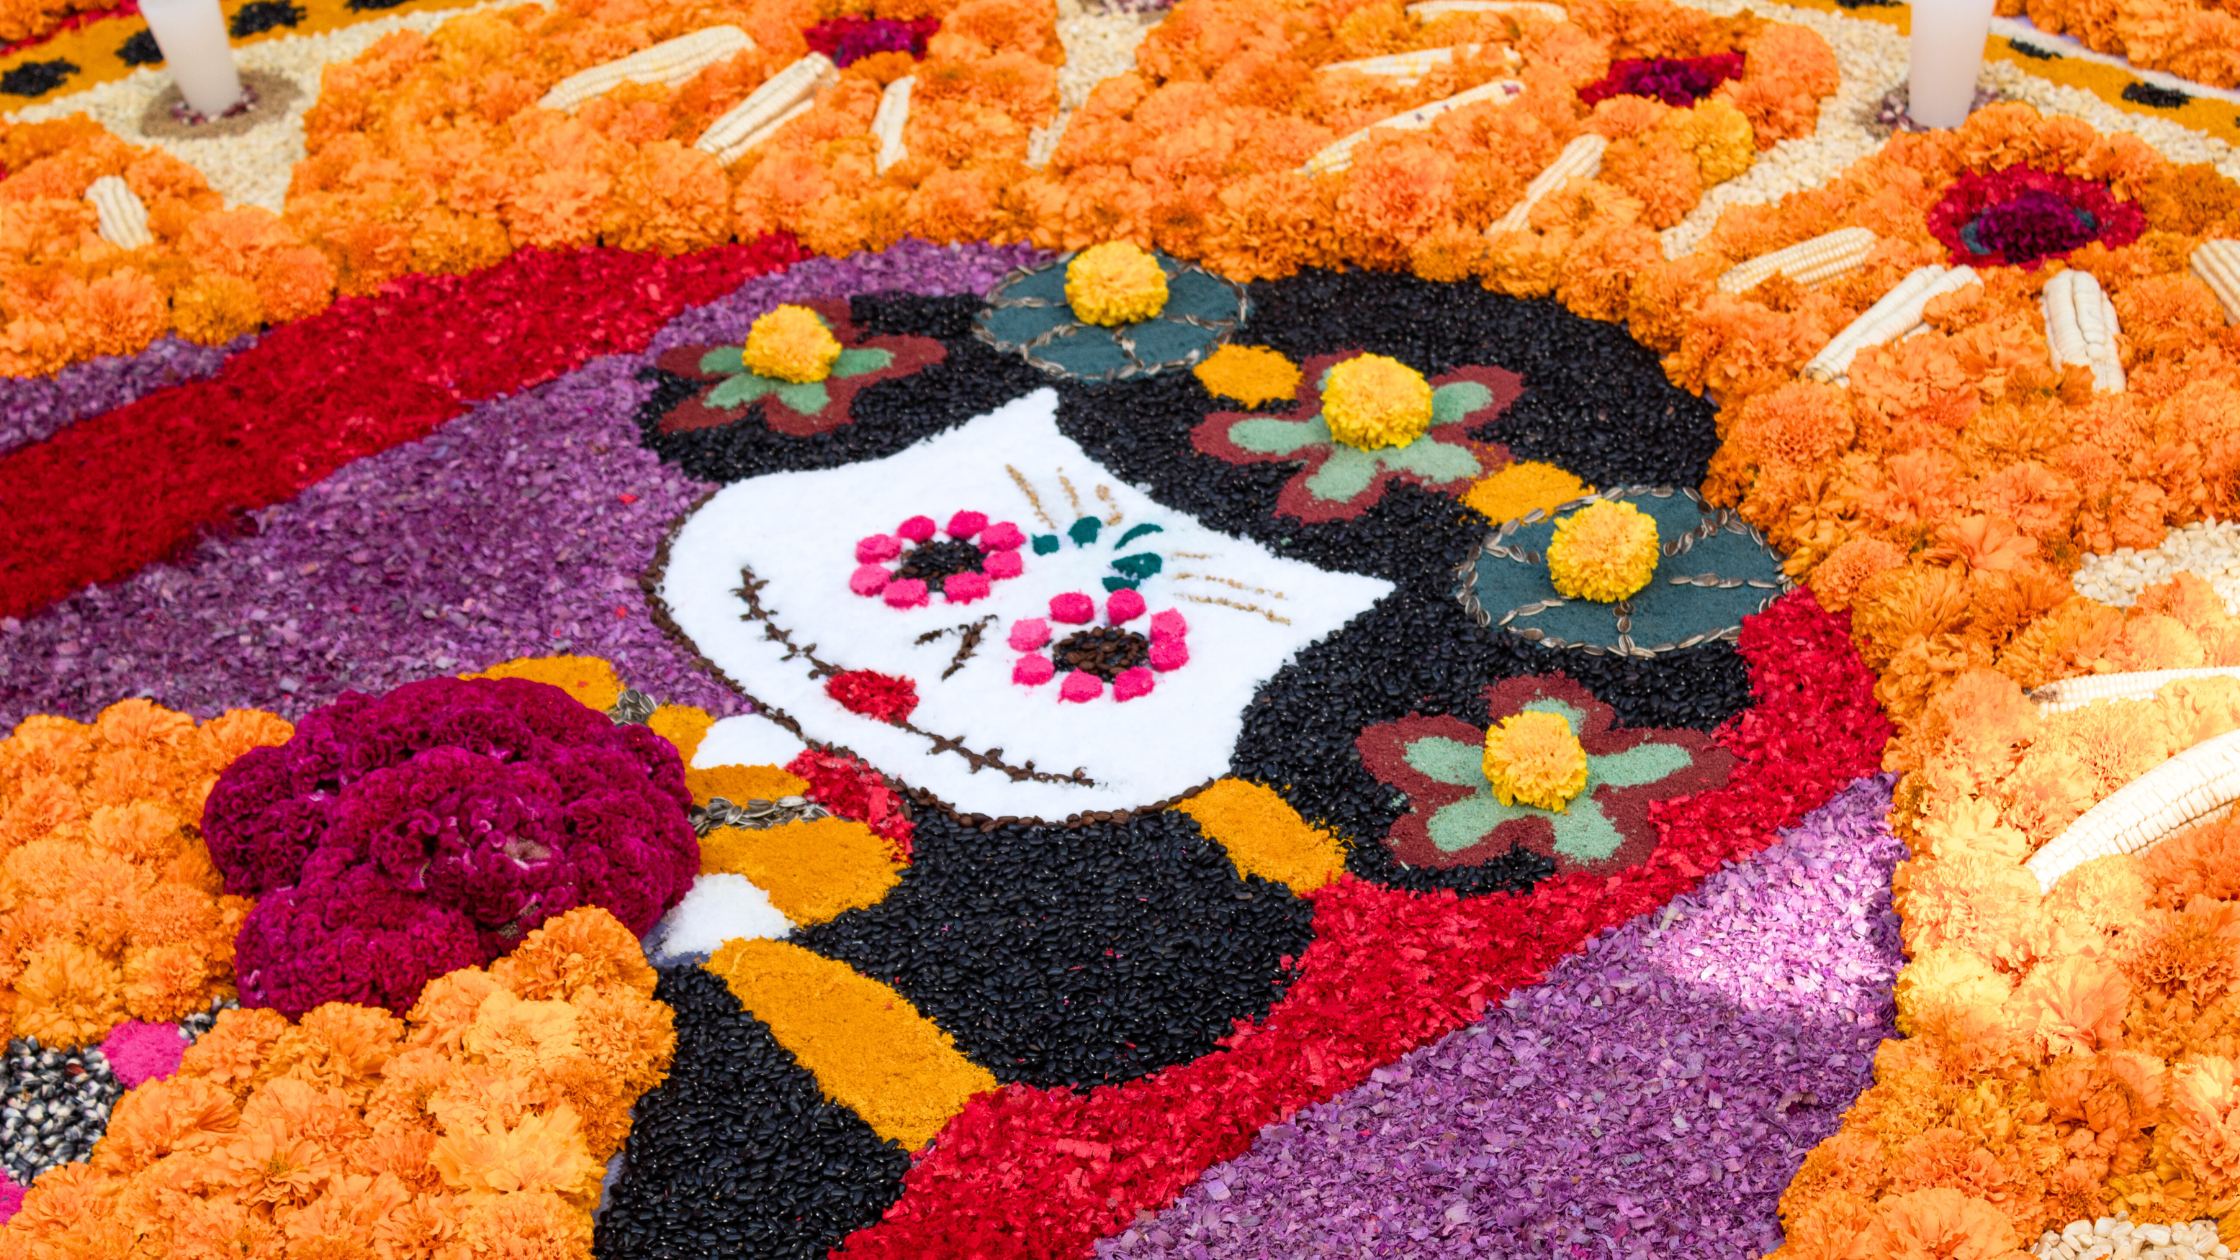 The Celebration Ritual of The Day of the Dead